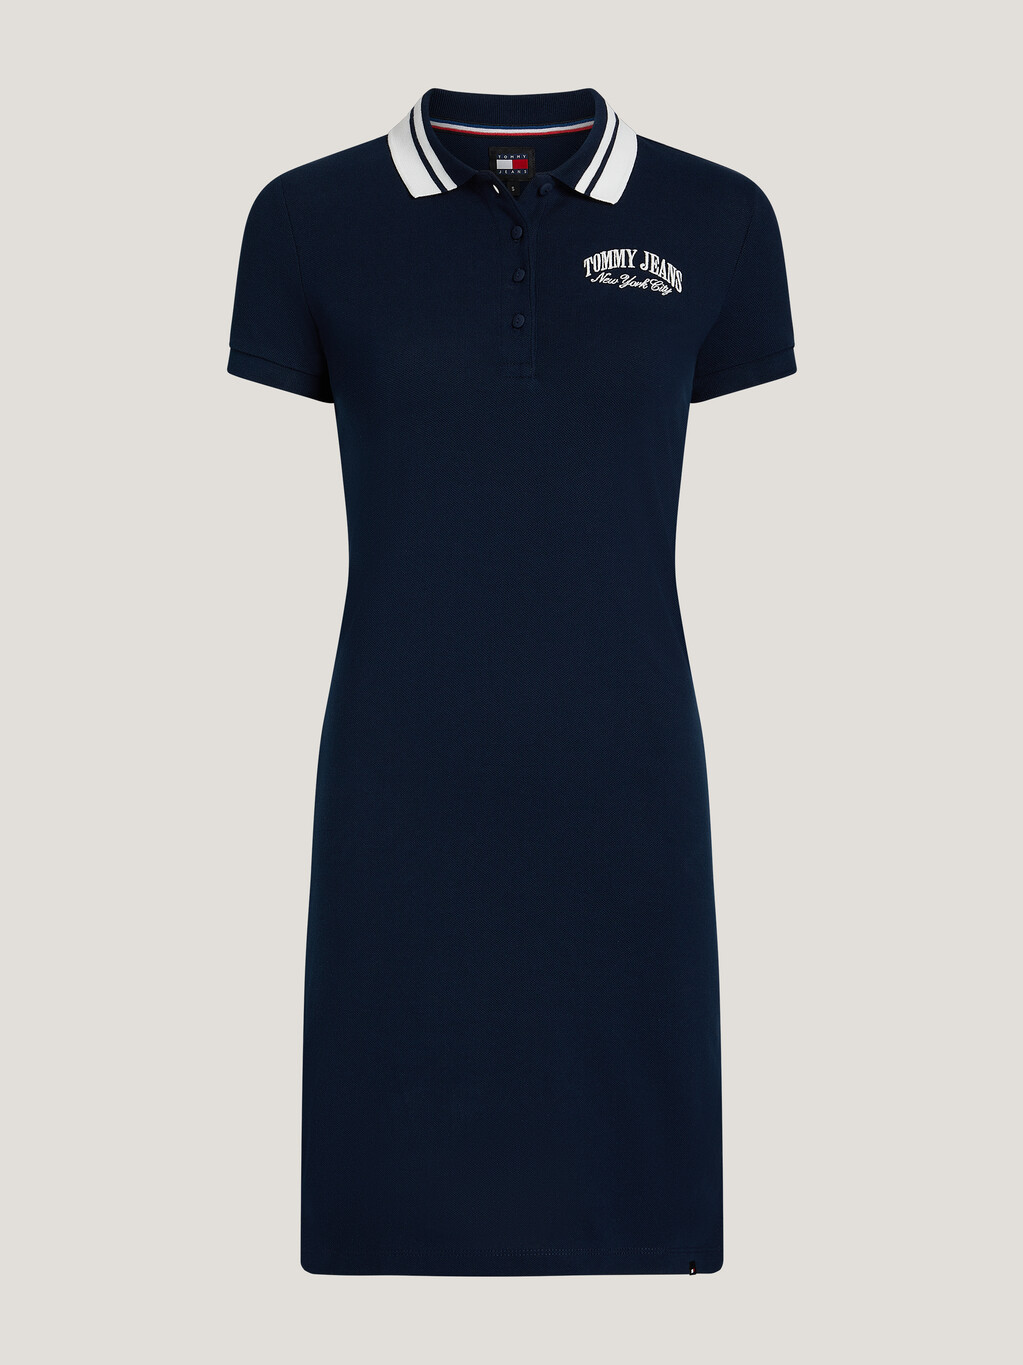 Tipped Collar Fitted Polo Dress, Dark Night Navy, hi-res